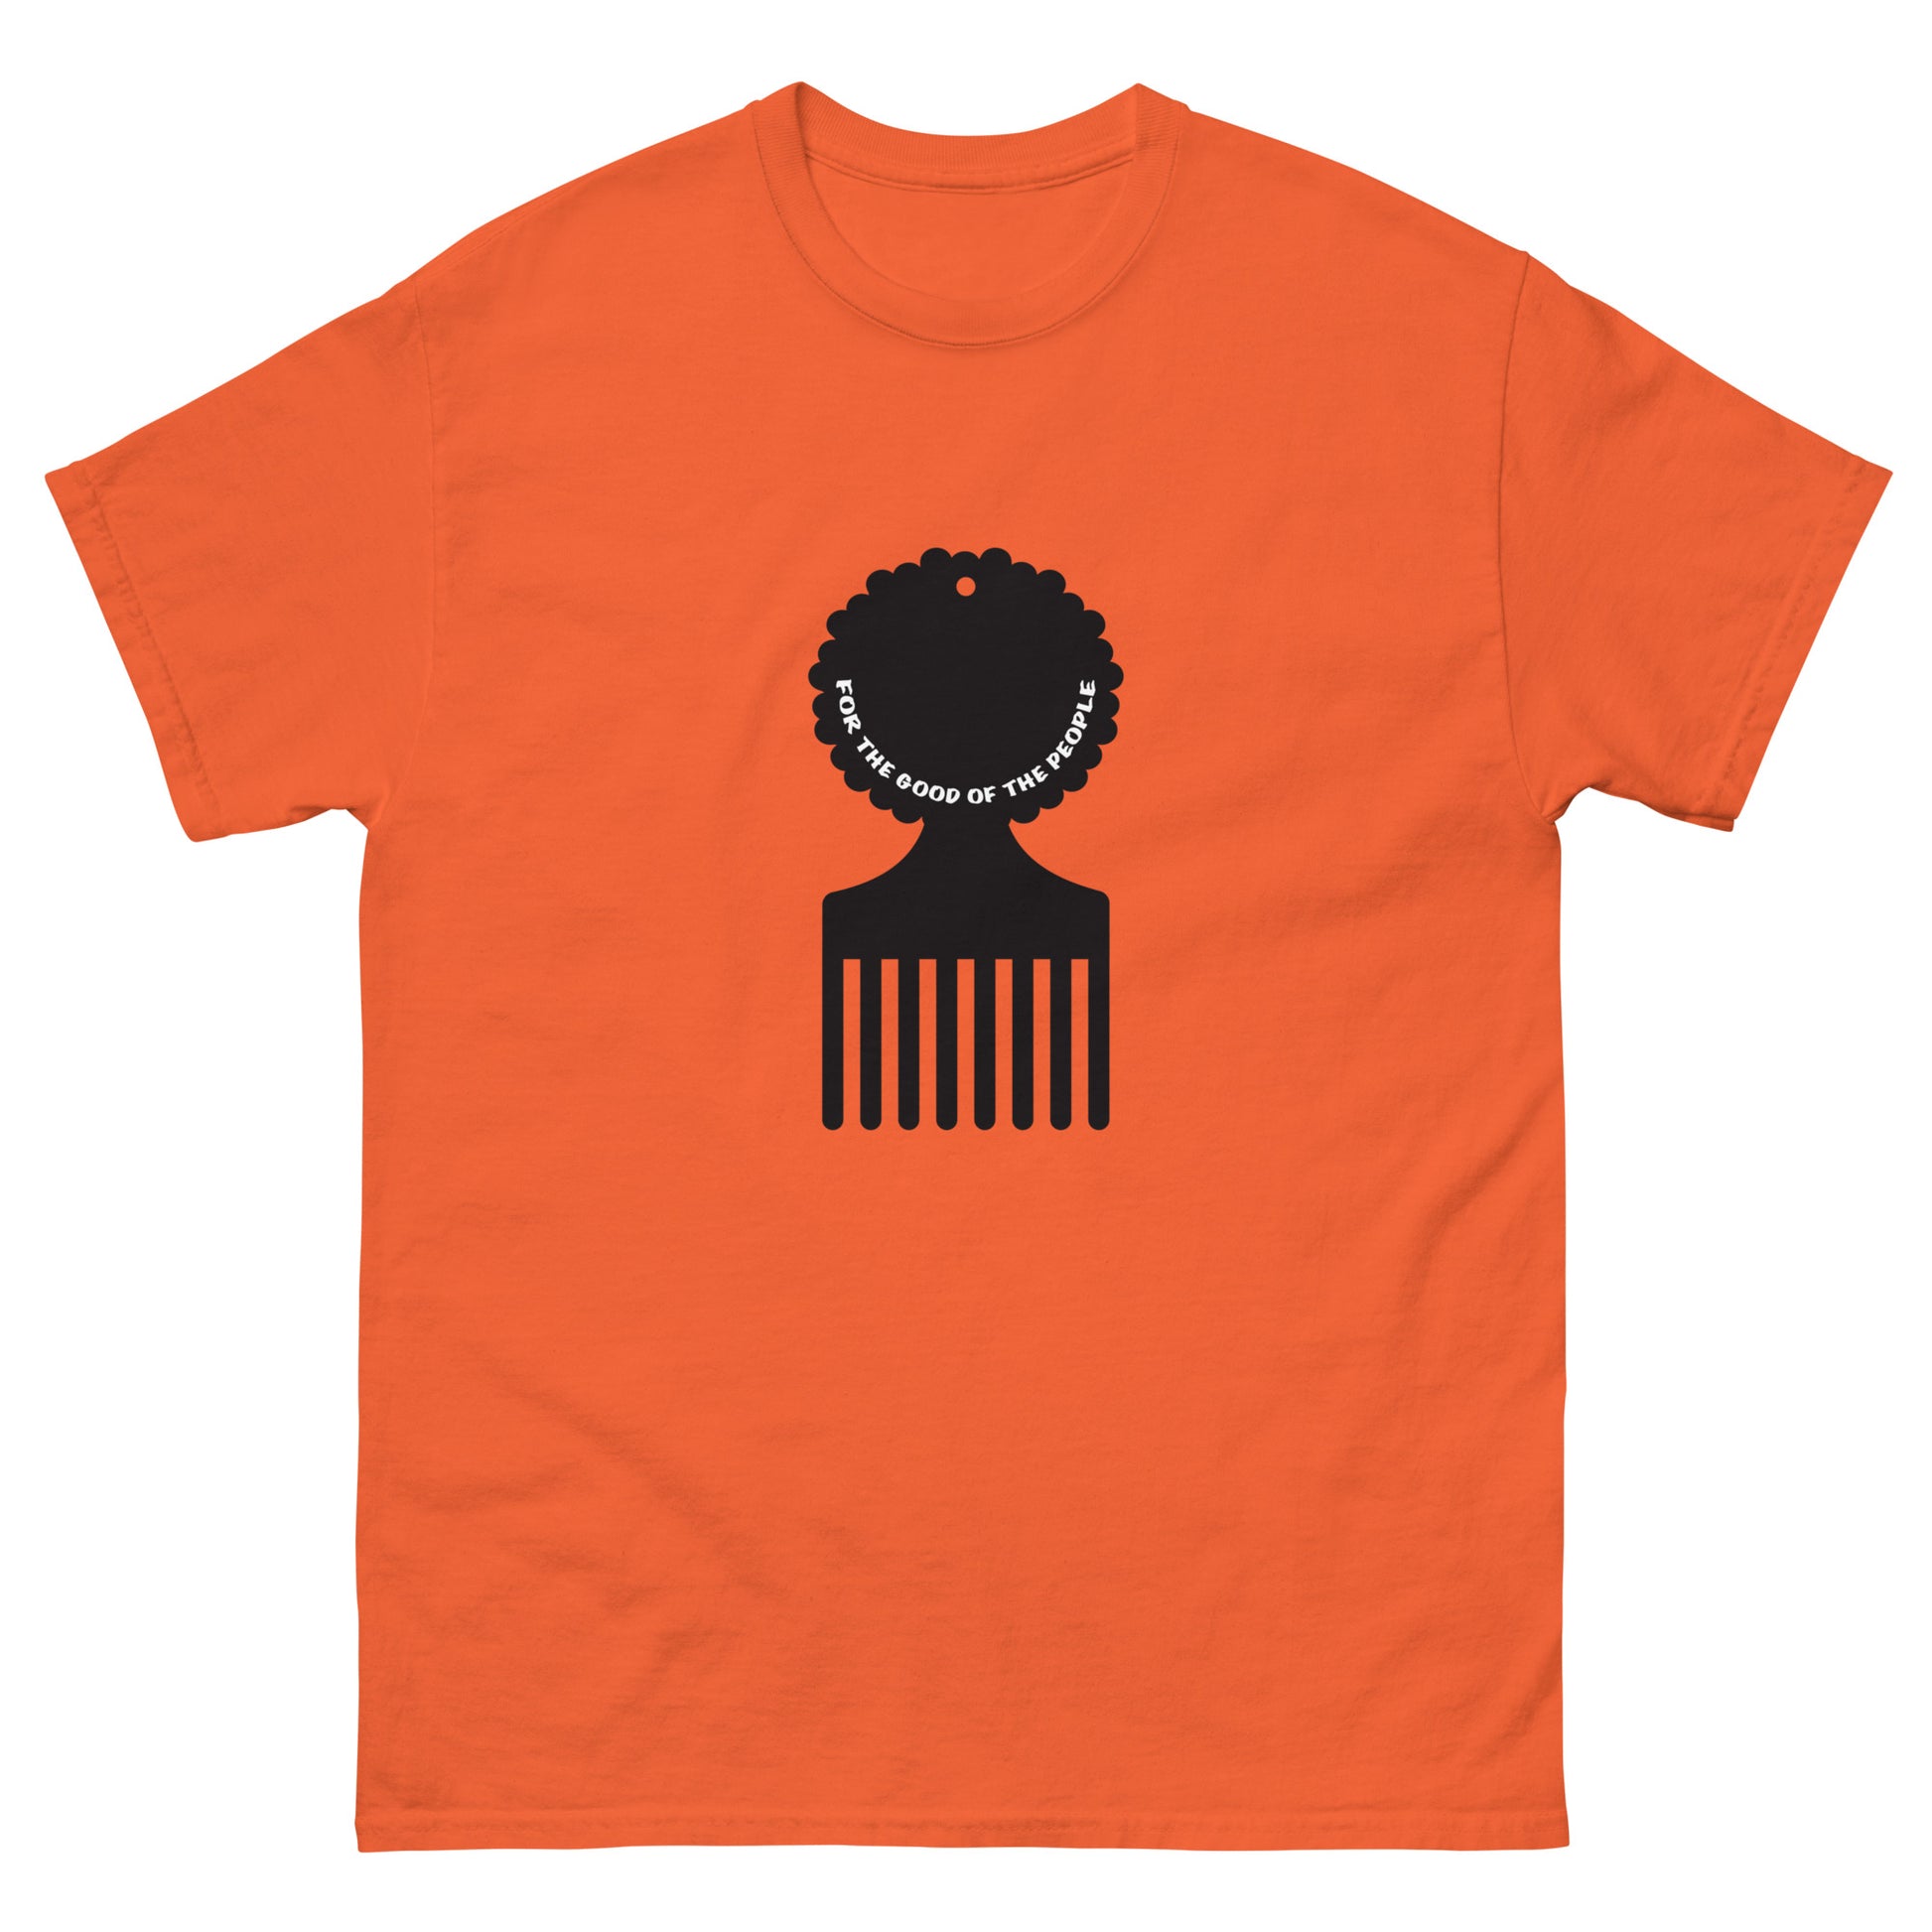 Men's orange tee with black afro pick in the center of shirt, with for the good of the people in white inside the afro pick's handle.